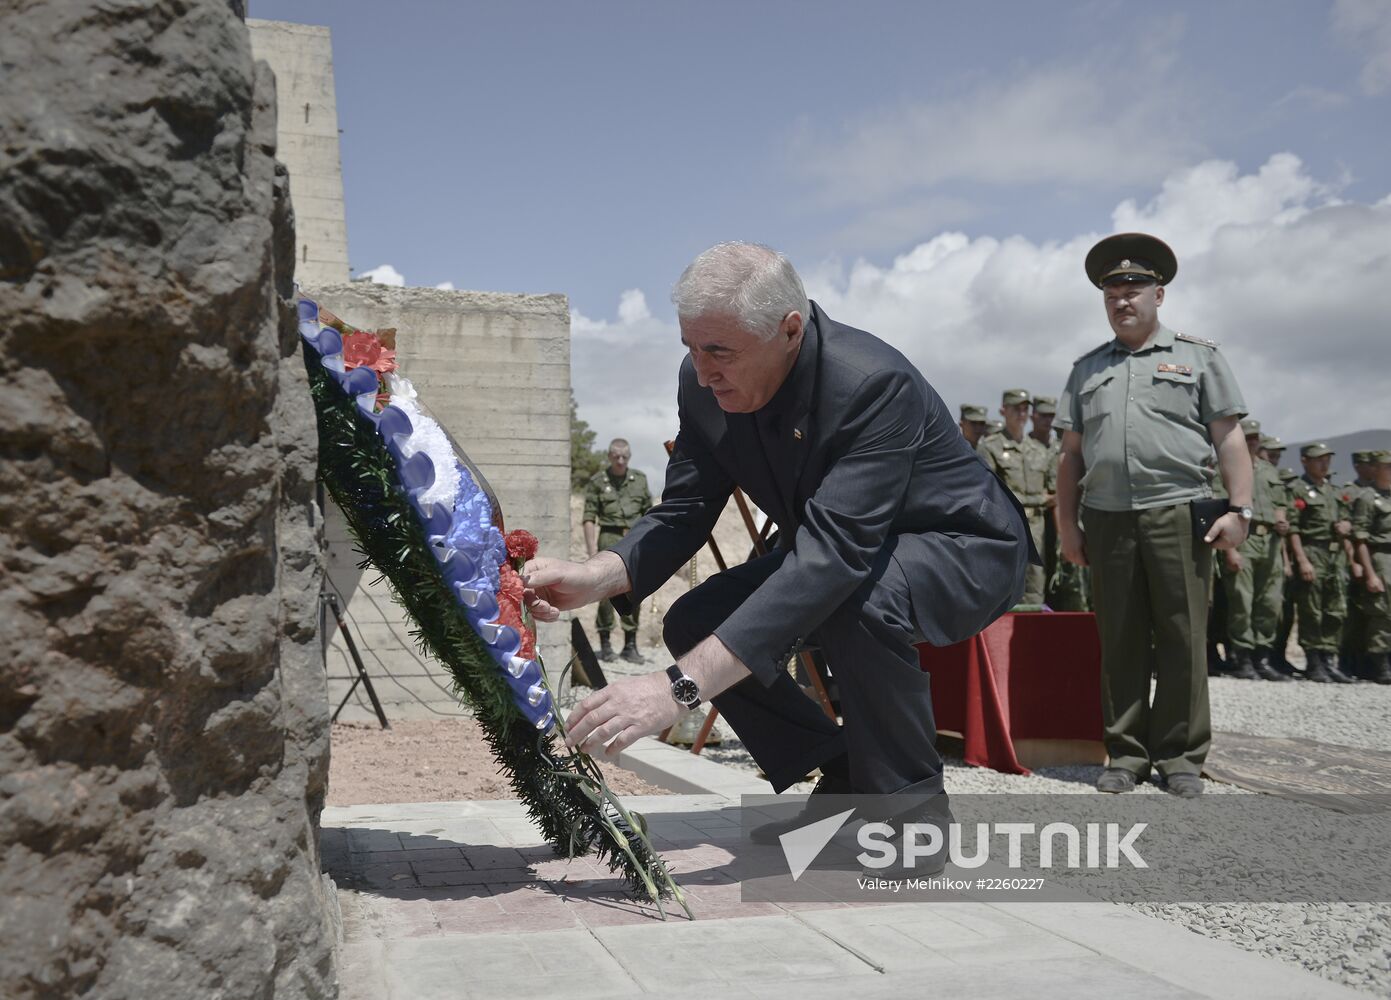 Fifth anniversary of tragic events in South Ossetia